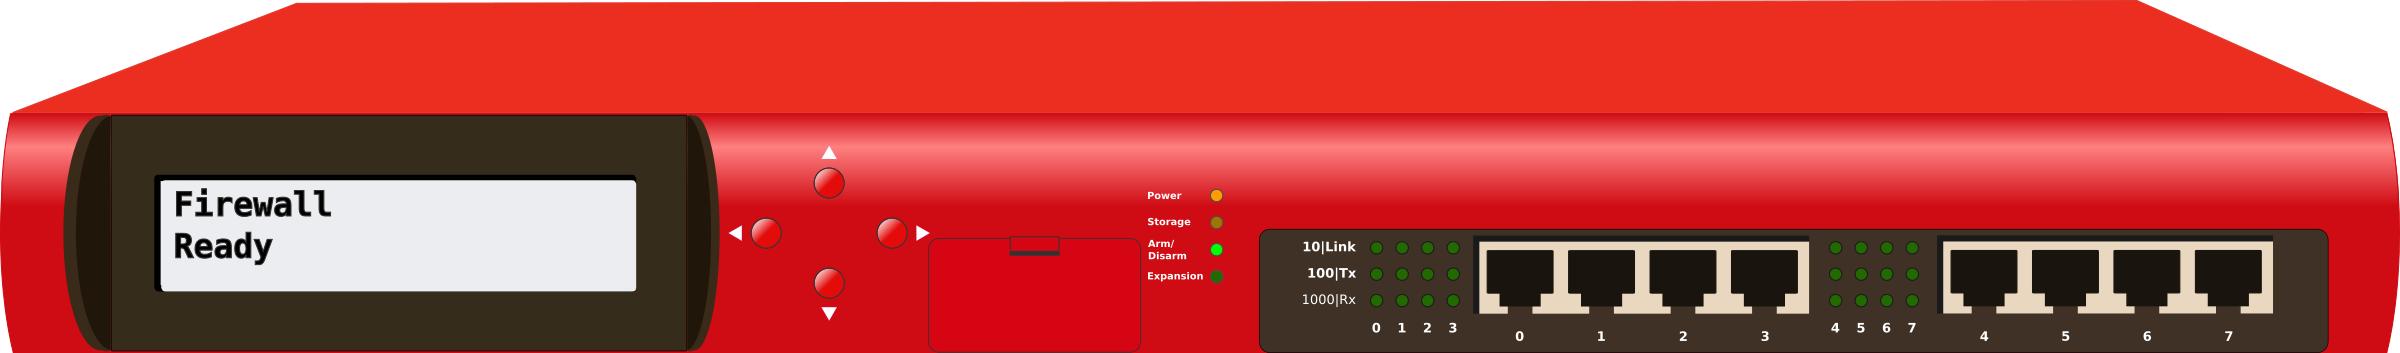 Red Firewall Appliance png